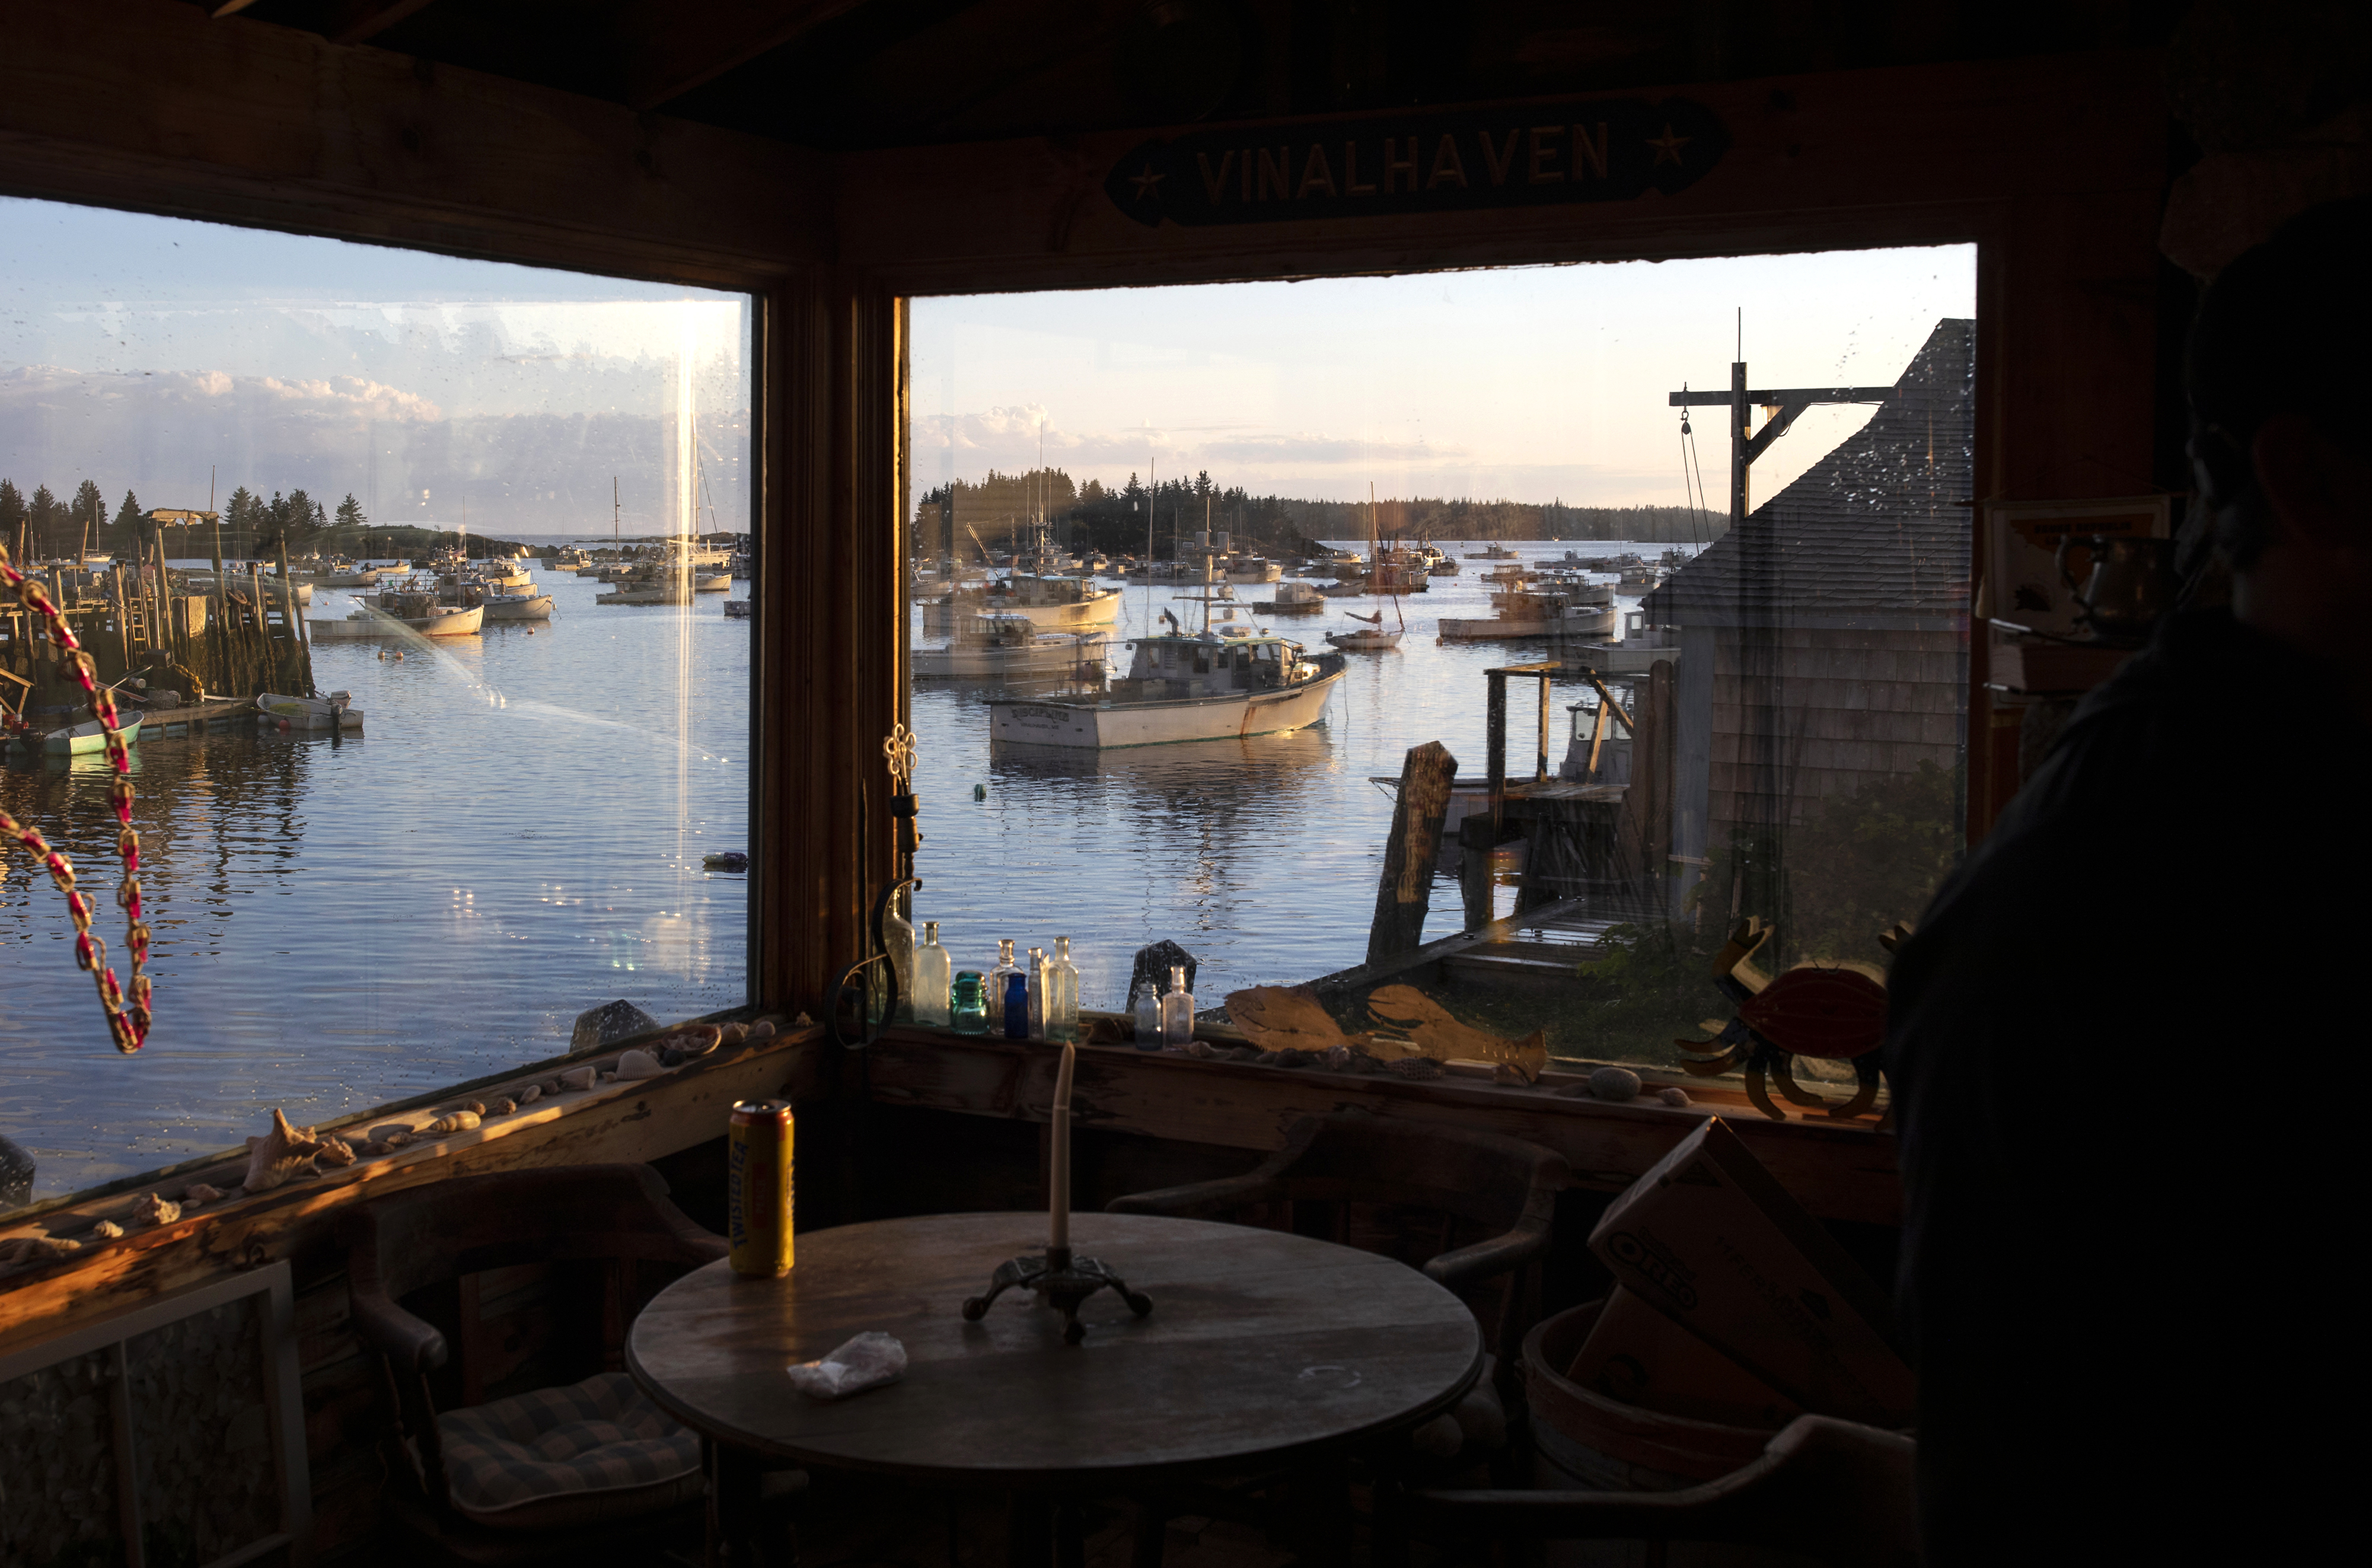 A slice of Carvers Harbor, as seen from inside a building where the local Lions Club holds its meetings. 